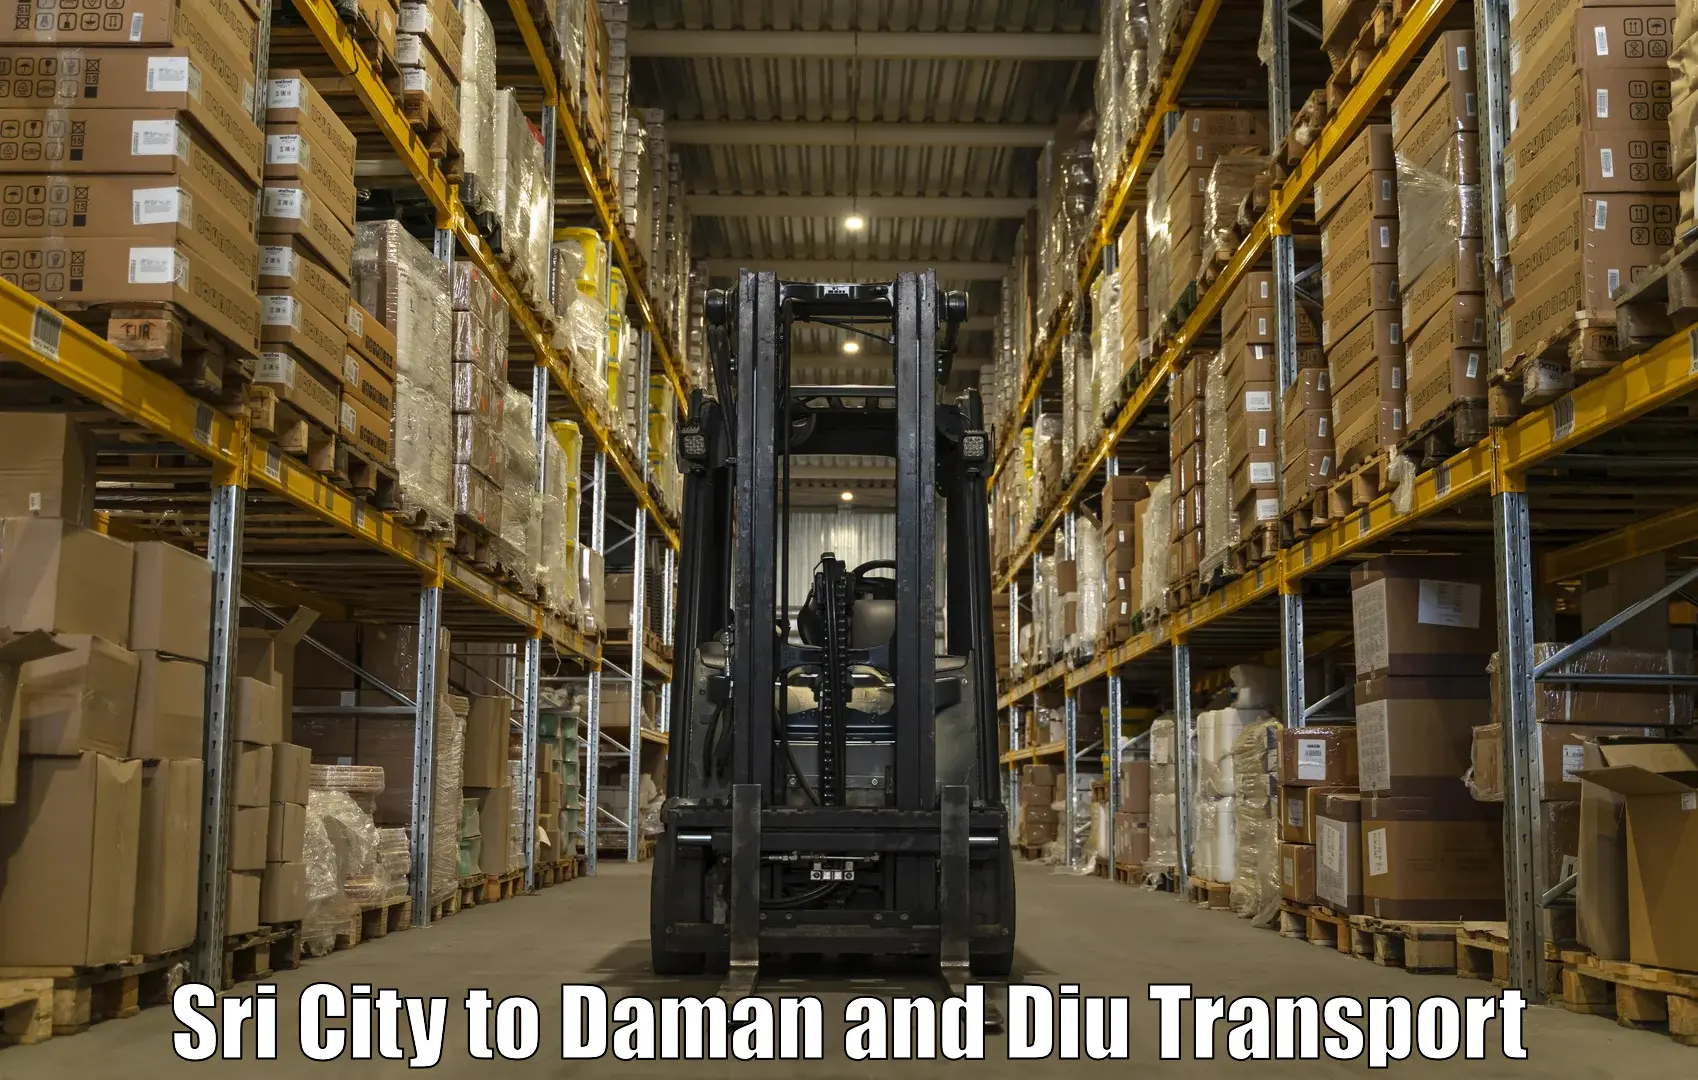 Transport shared services Sri City to Diu